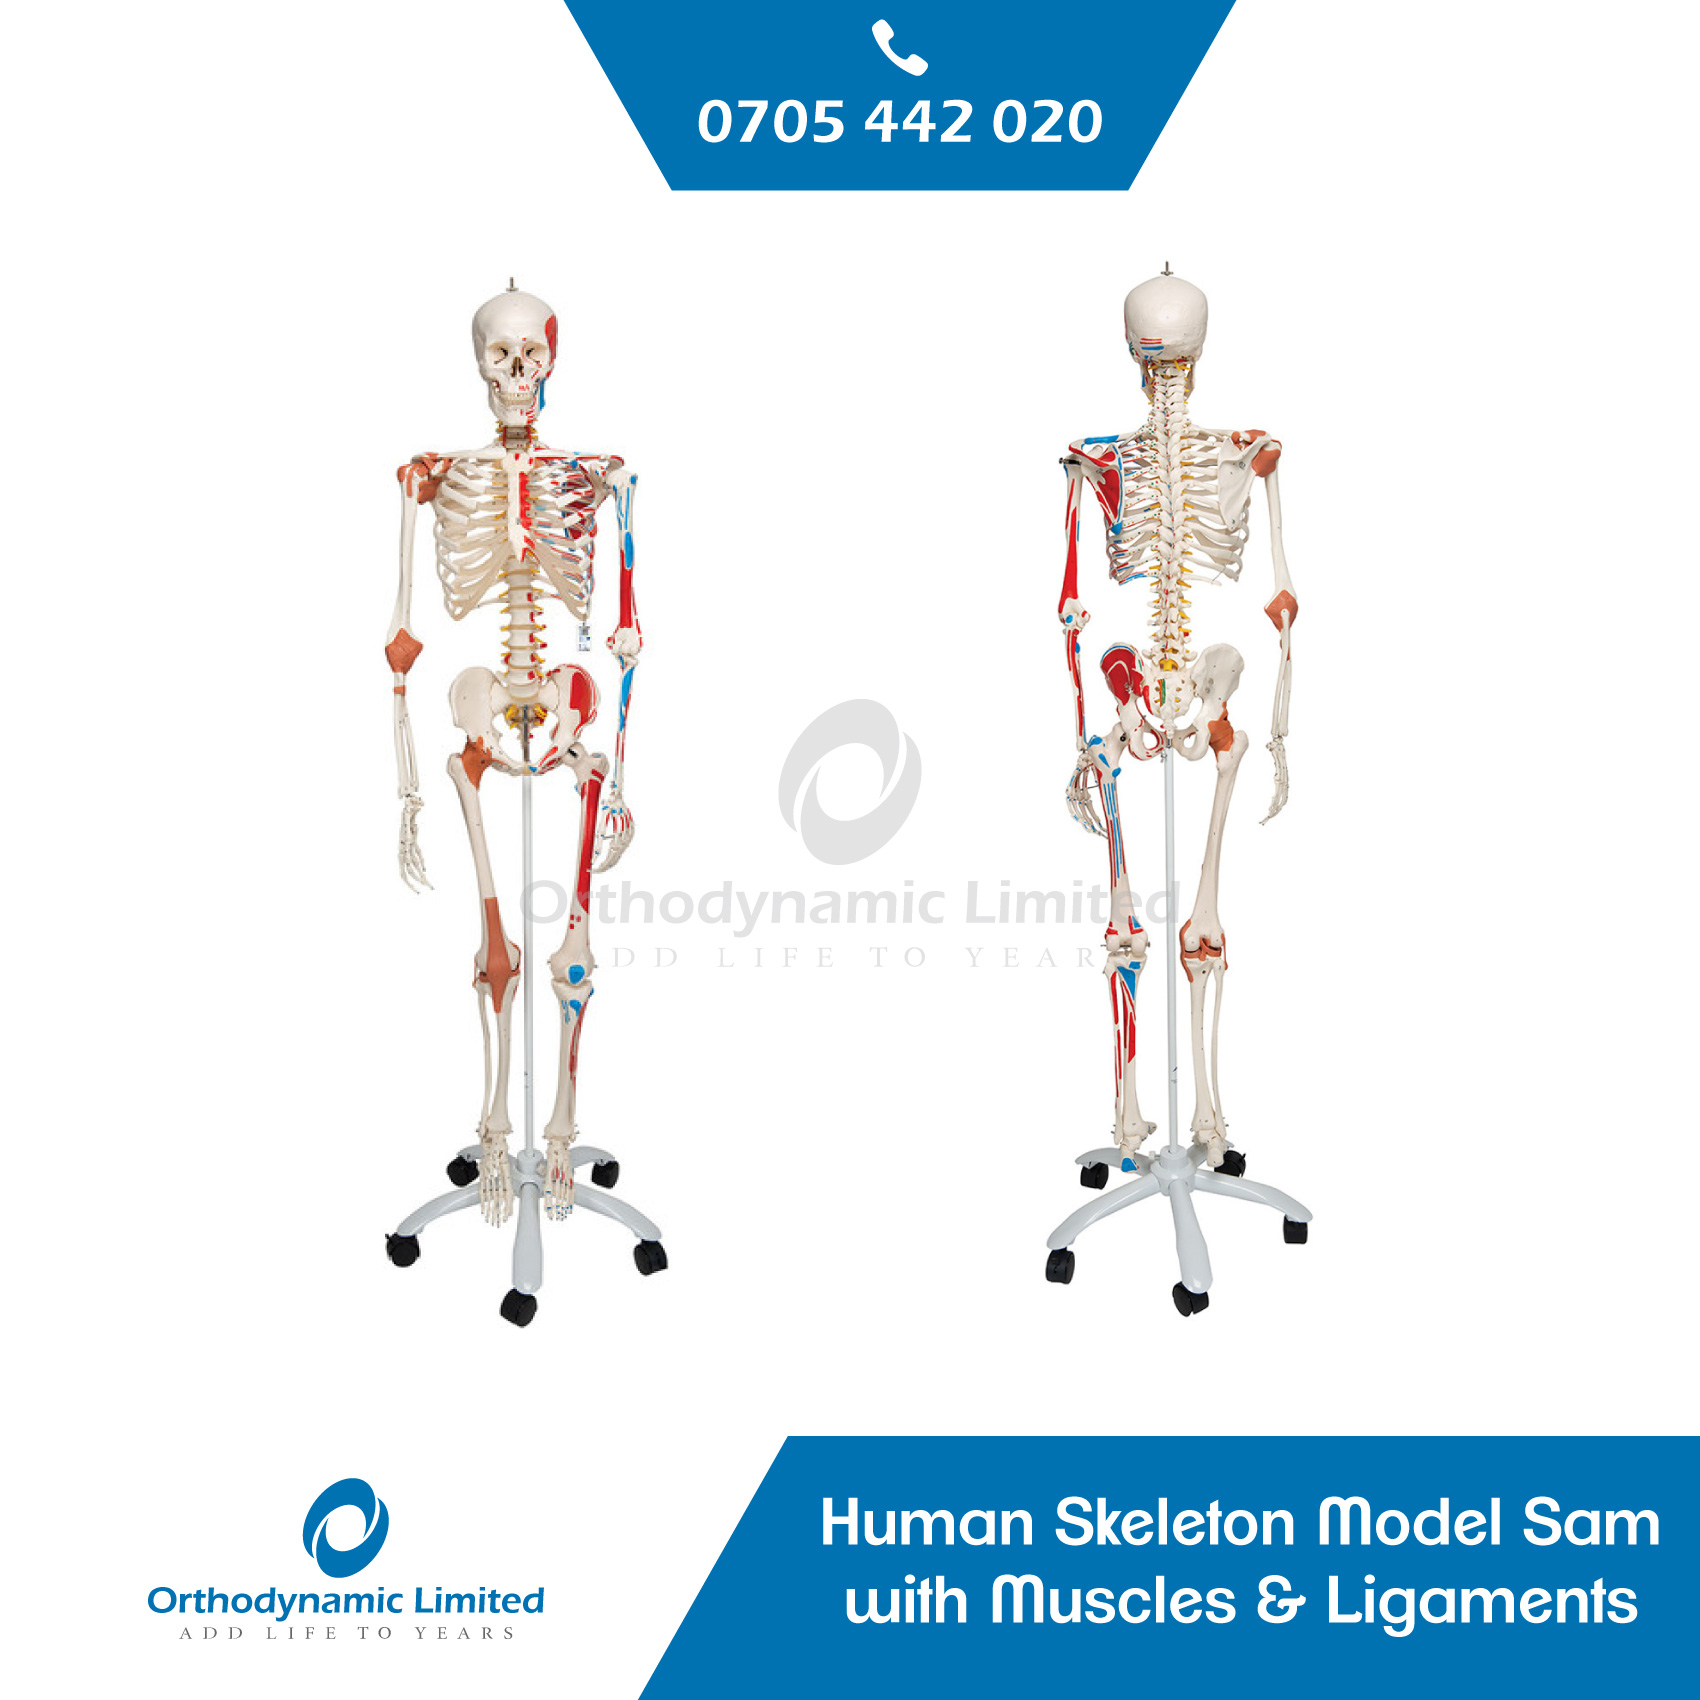 Human Skeleton Model Sam with Muscles & Ligaments